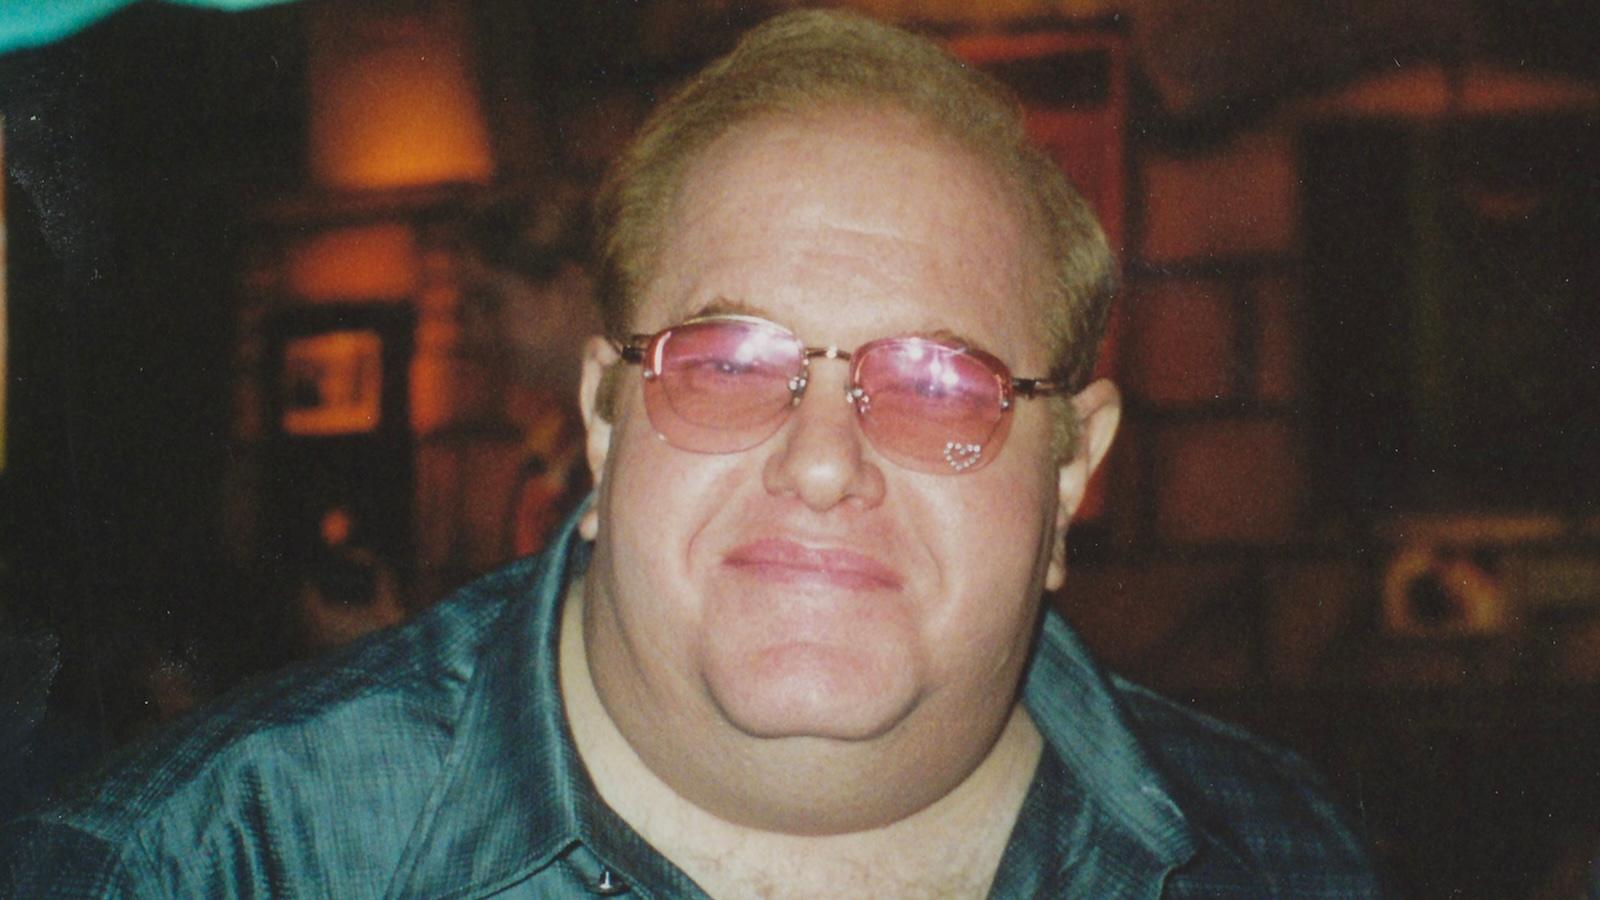 Photo of Lou Pearlman shown in Dirty Pop